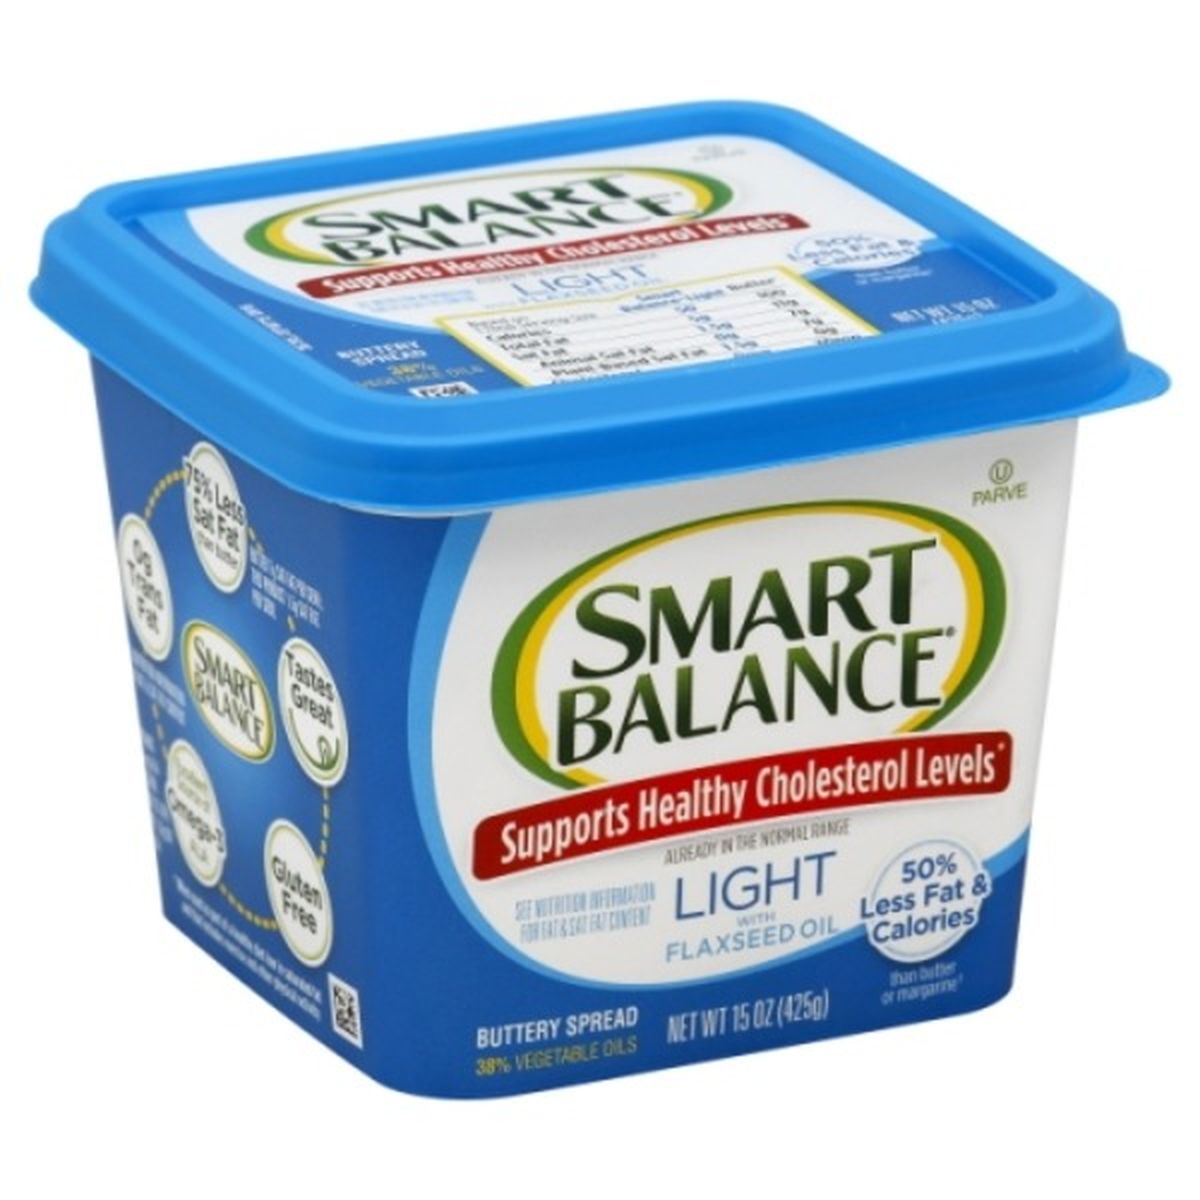 Calories in Smart Balance Buttery Spread, Light, with Flaxseed Oil